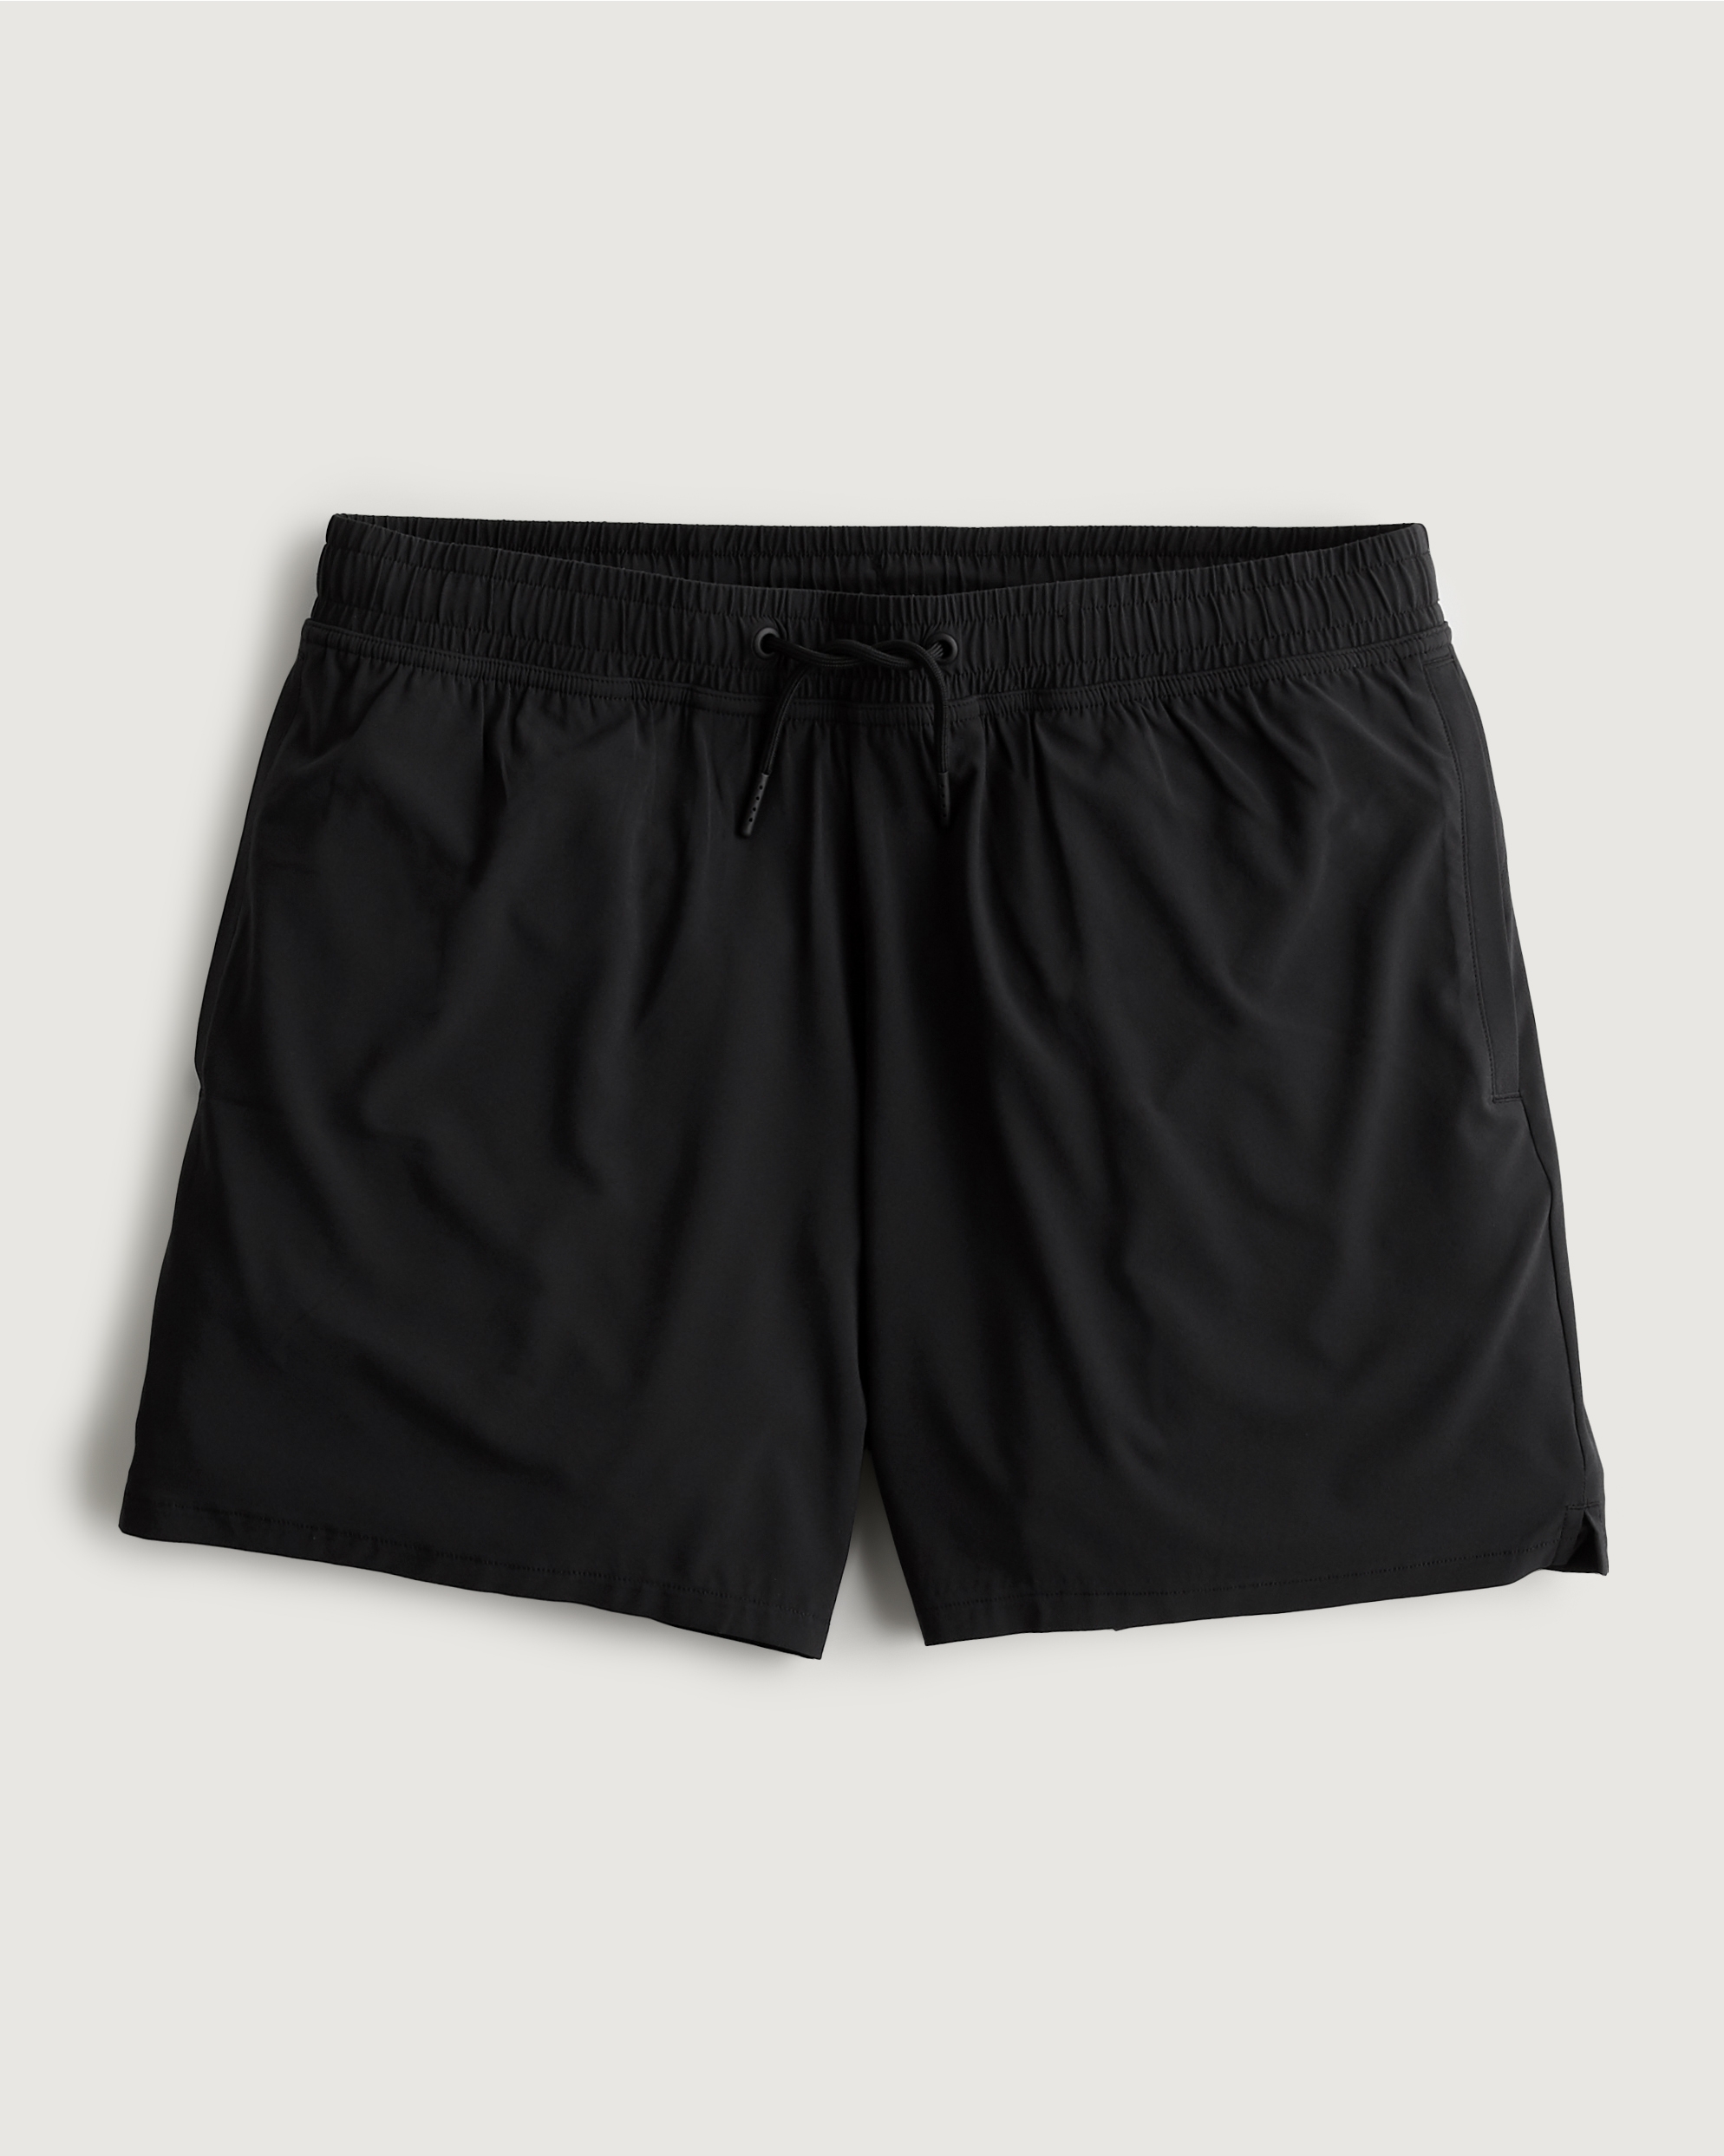 Gilly Hicks Active Lined Shorts 5"